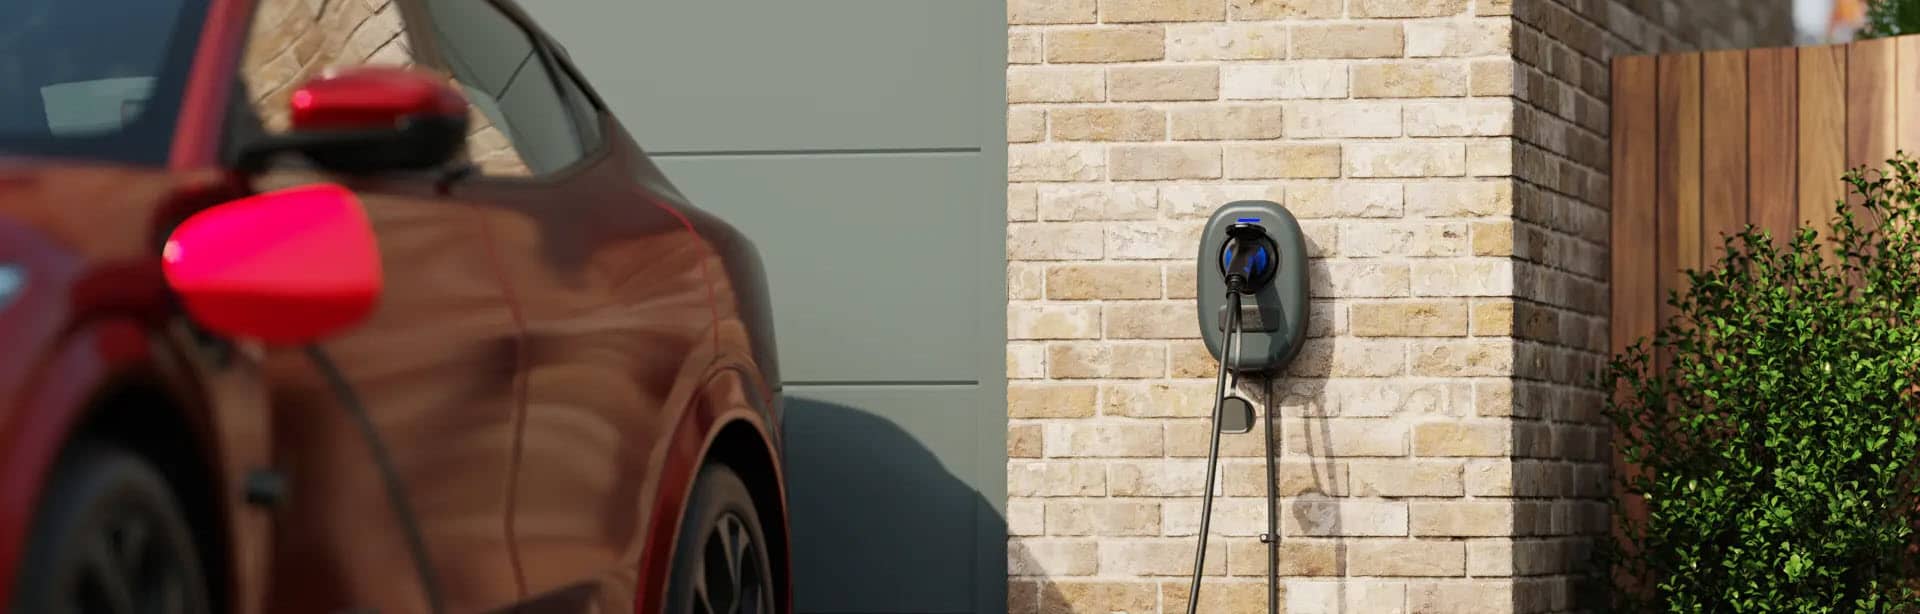 Electric Vehicle charging point installers in Edinburgh.